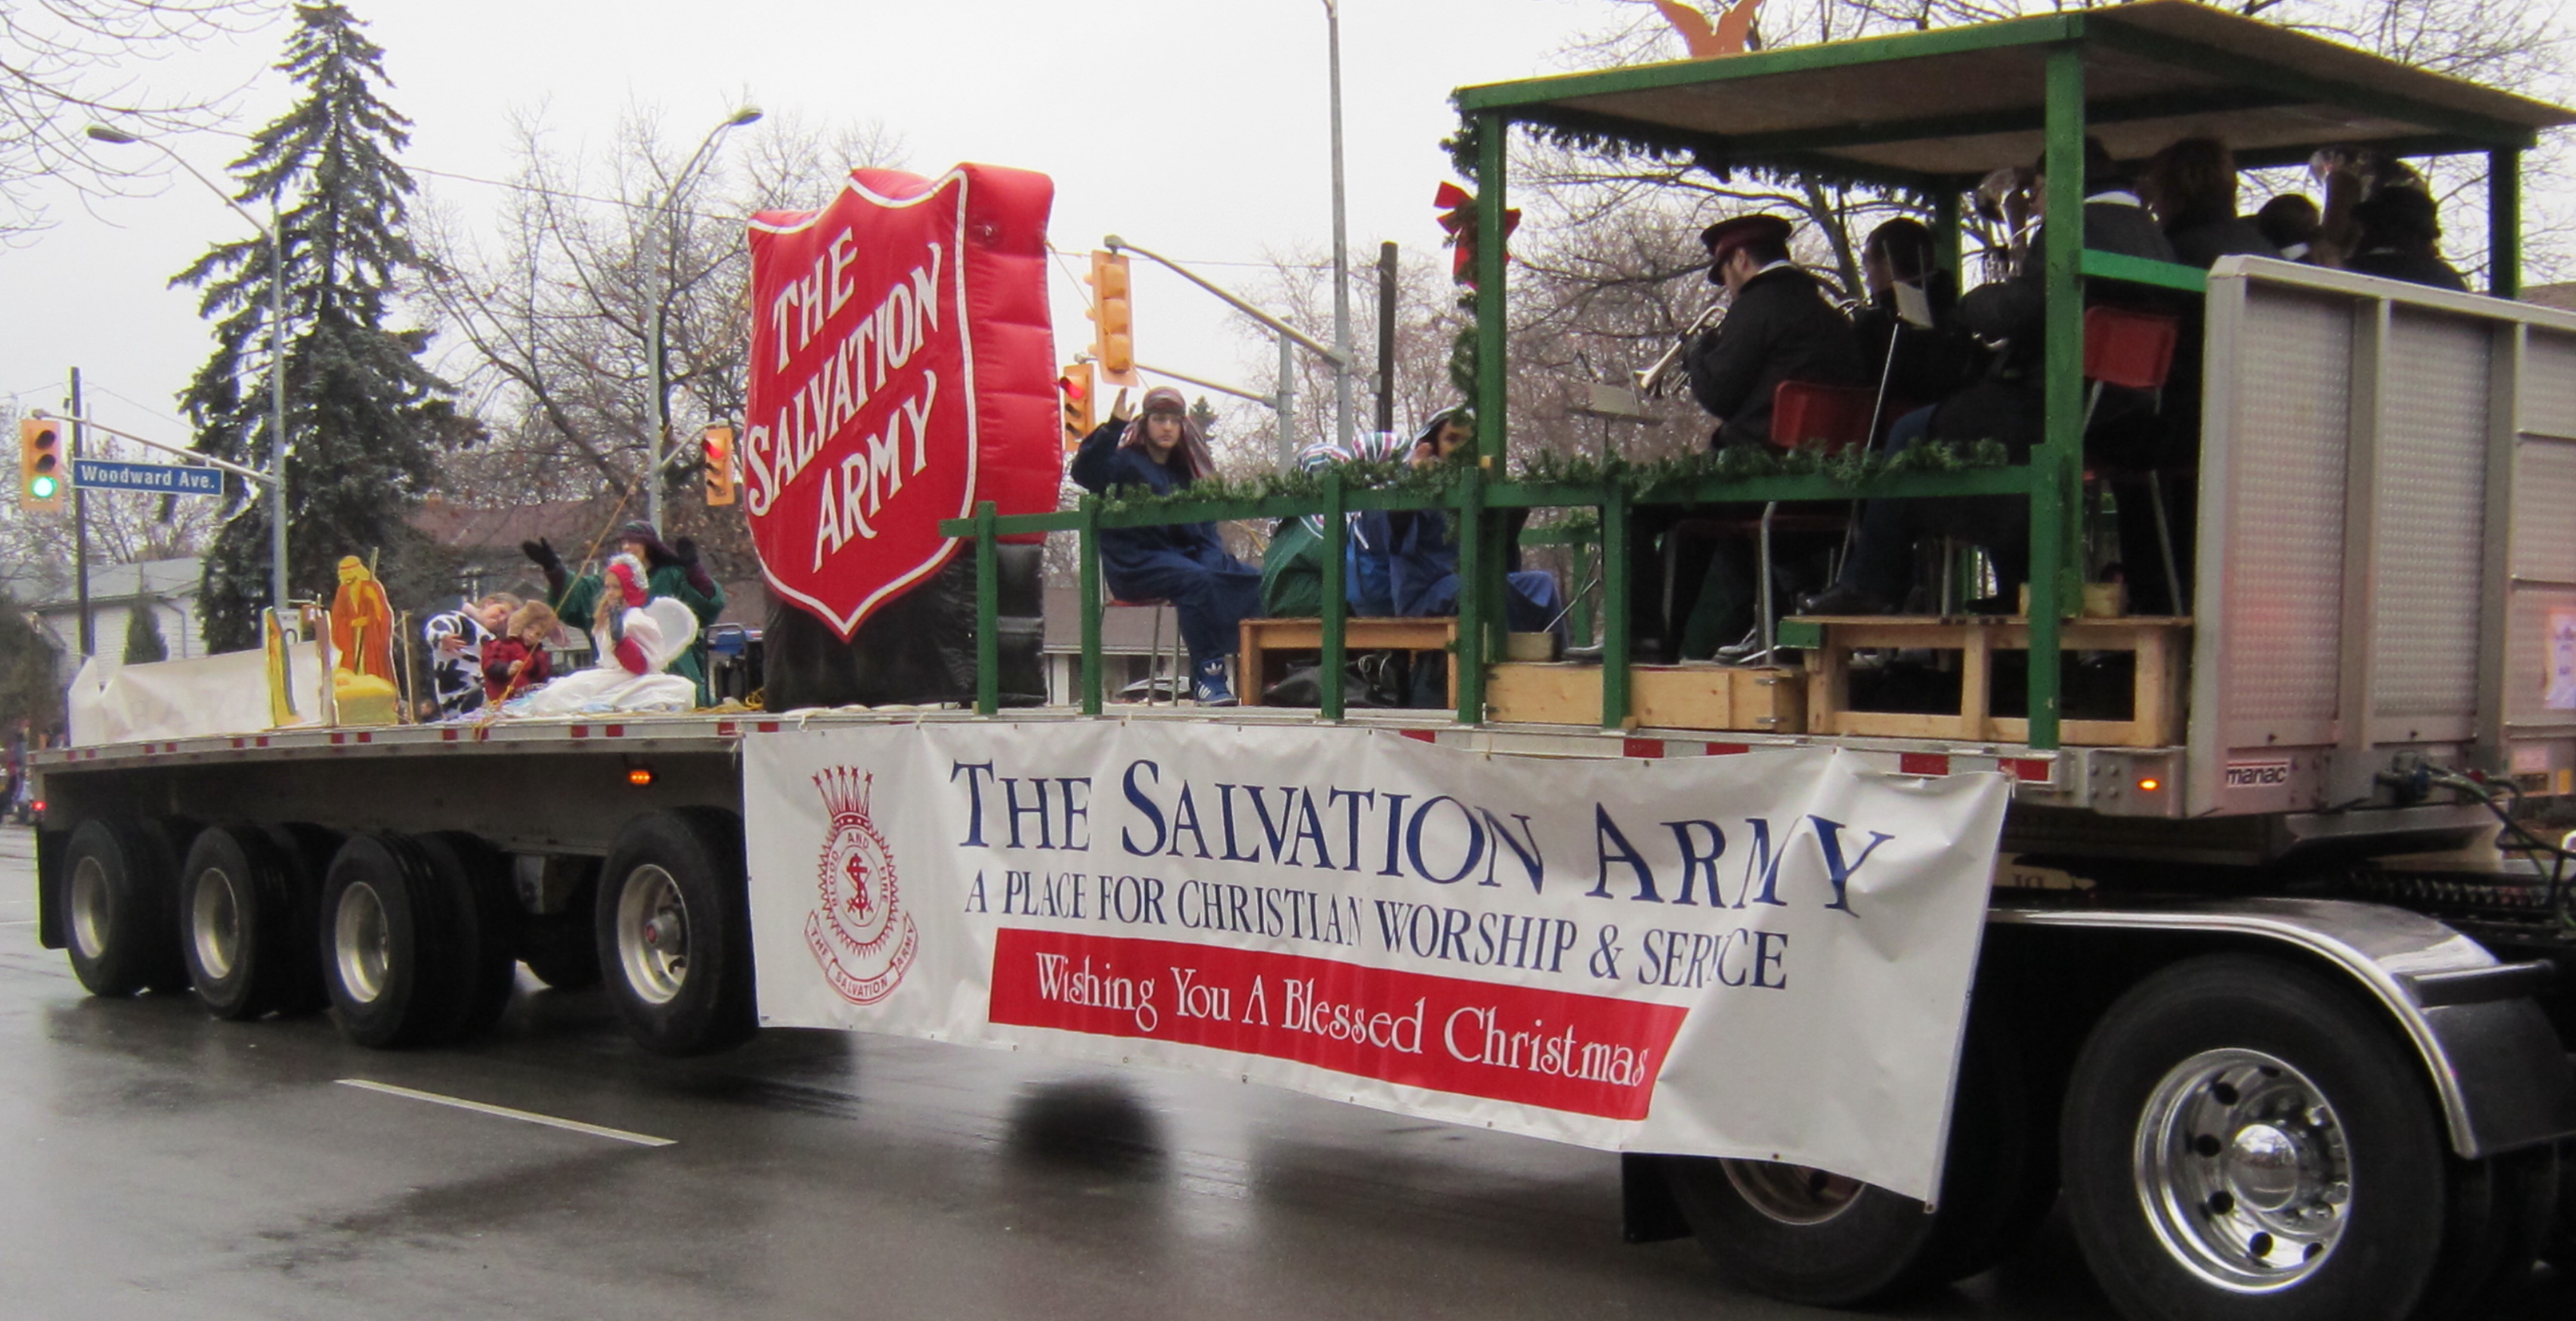 The Salvation Army is there for the good times and during the hard times. The parade was one of the Good Times.